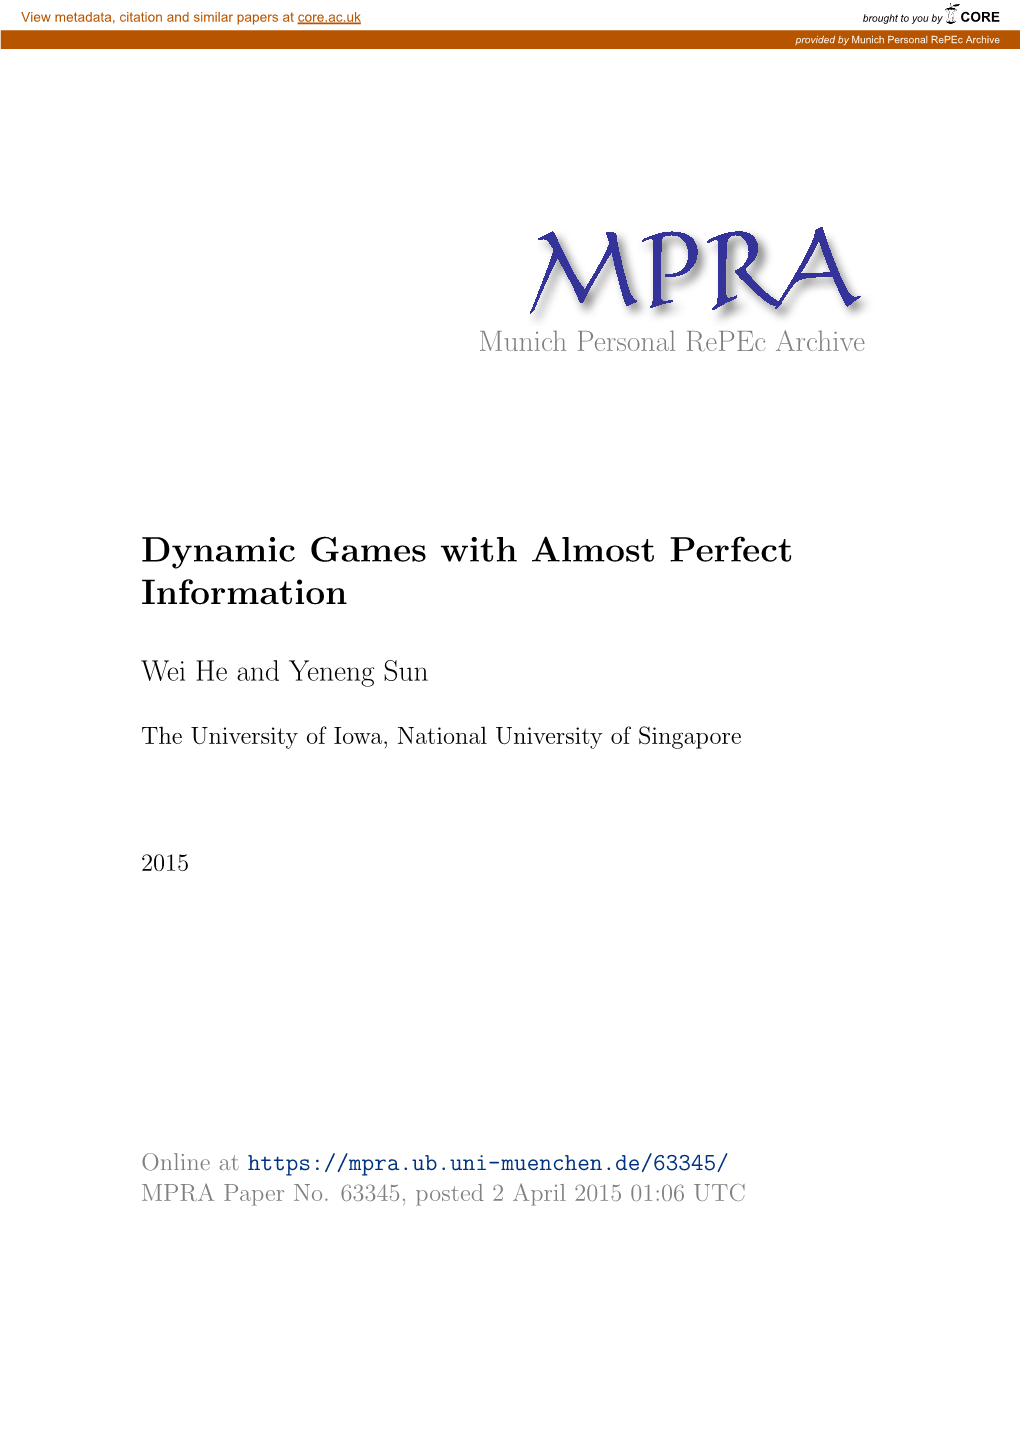 Dynamic Games with Almost Perfect Information